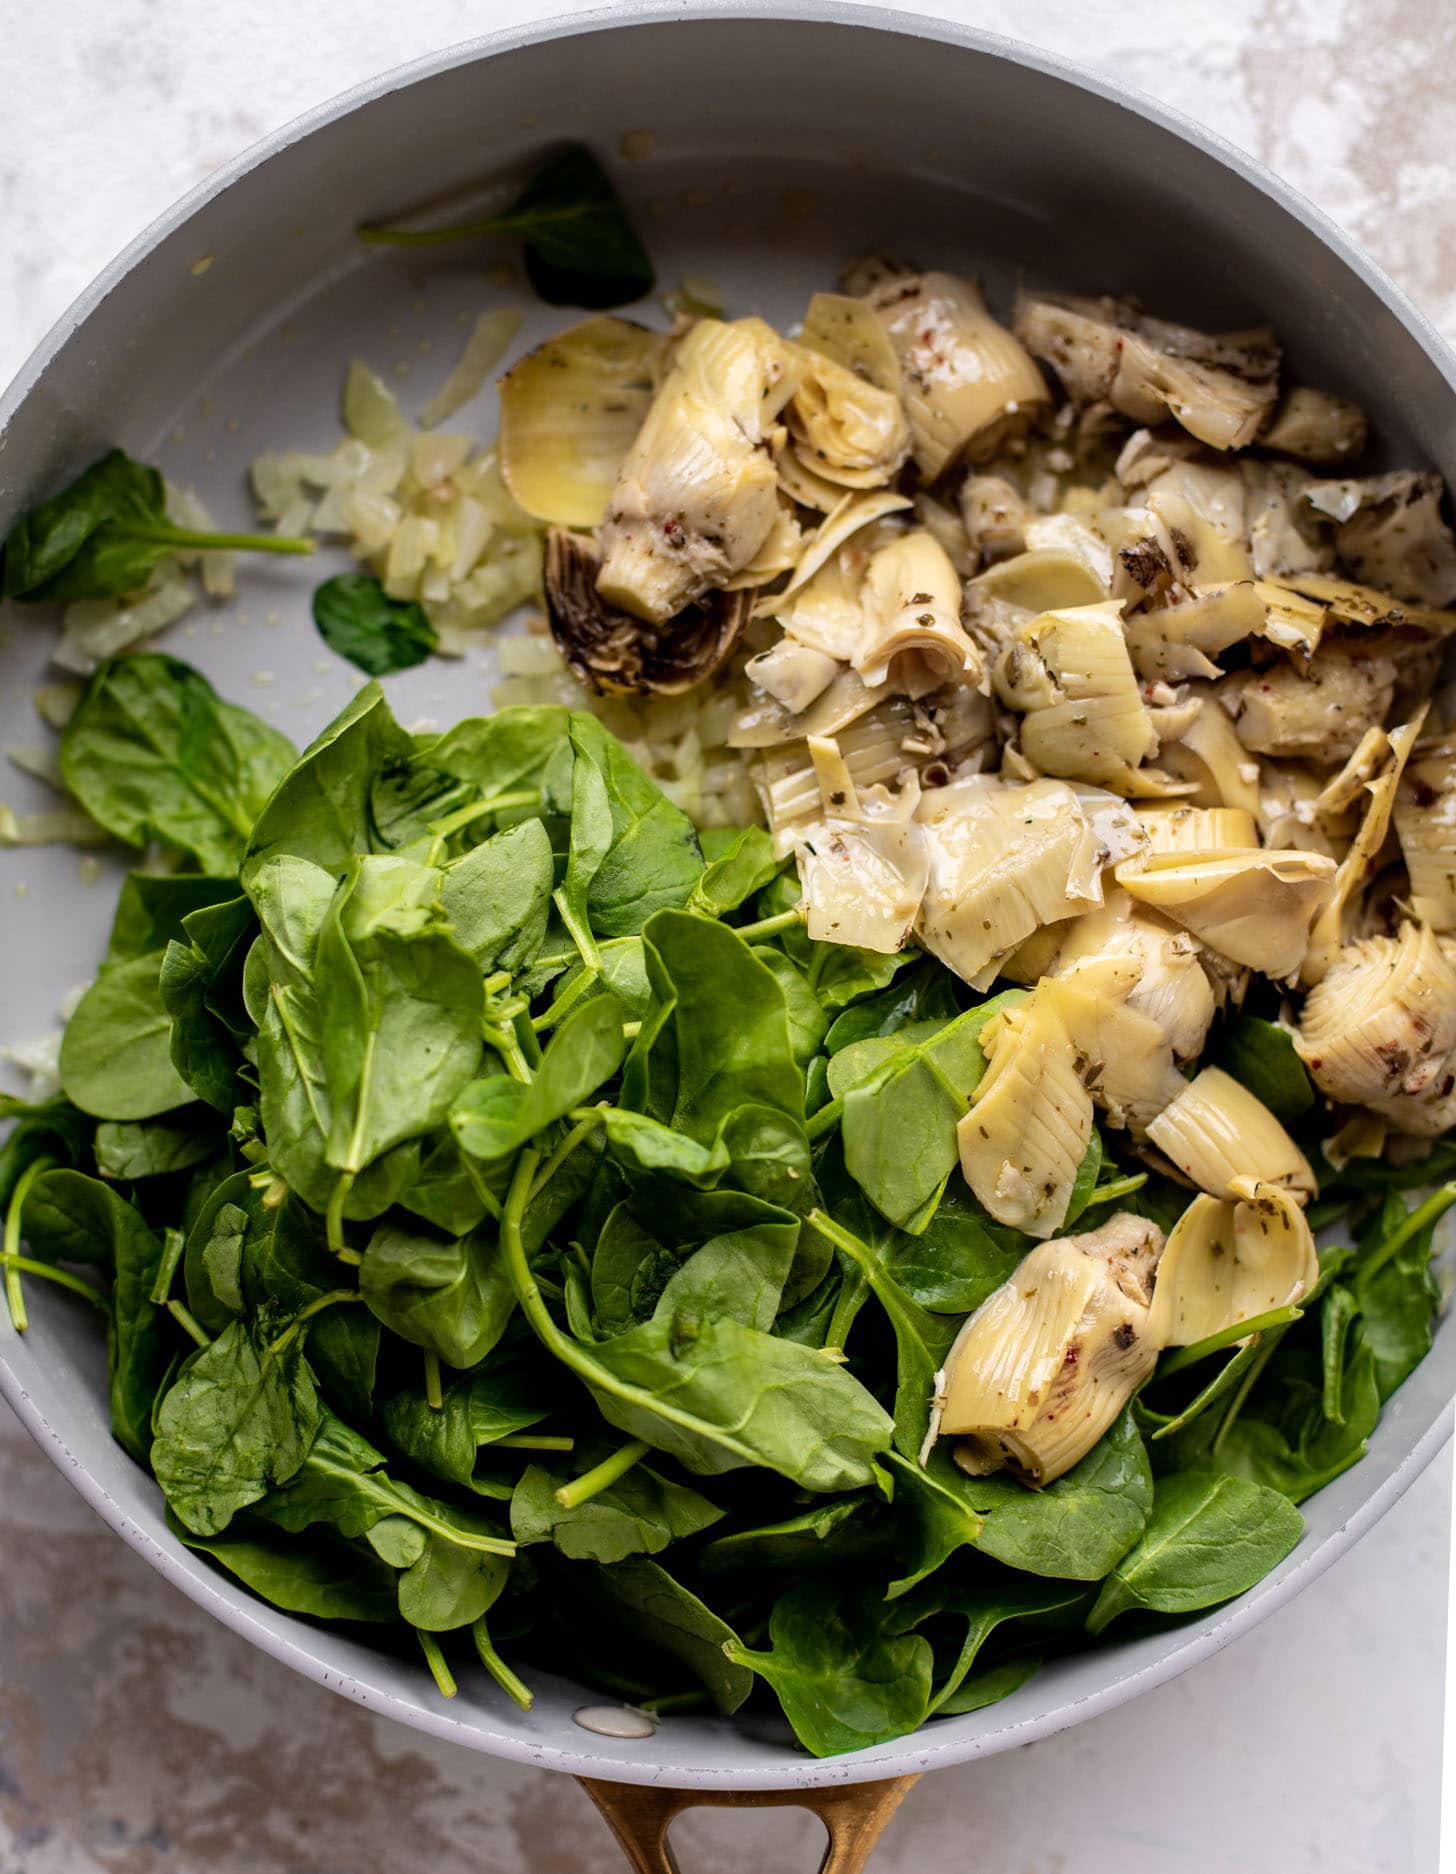 spinach and artichokes in a skillet